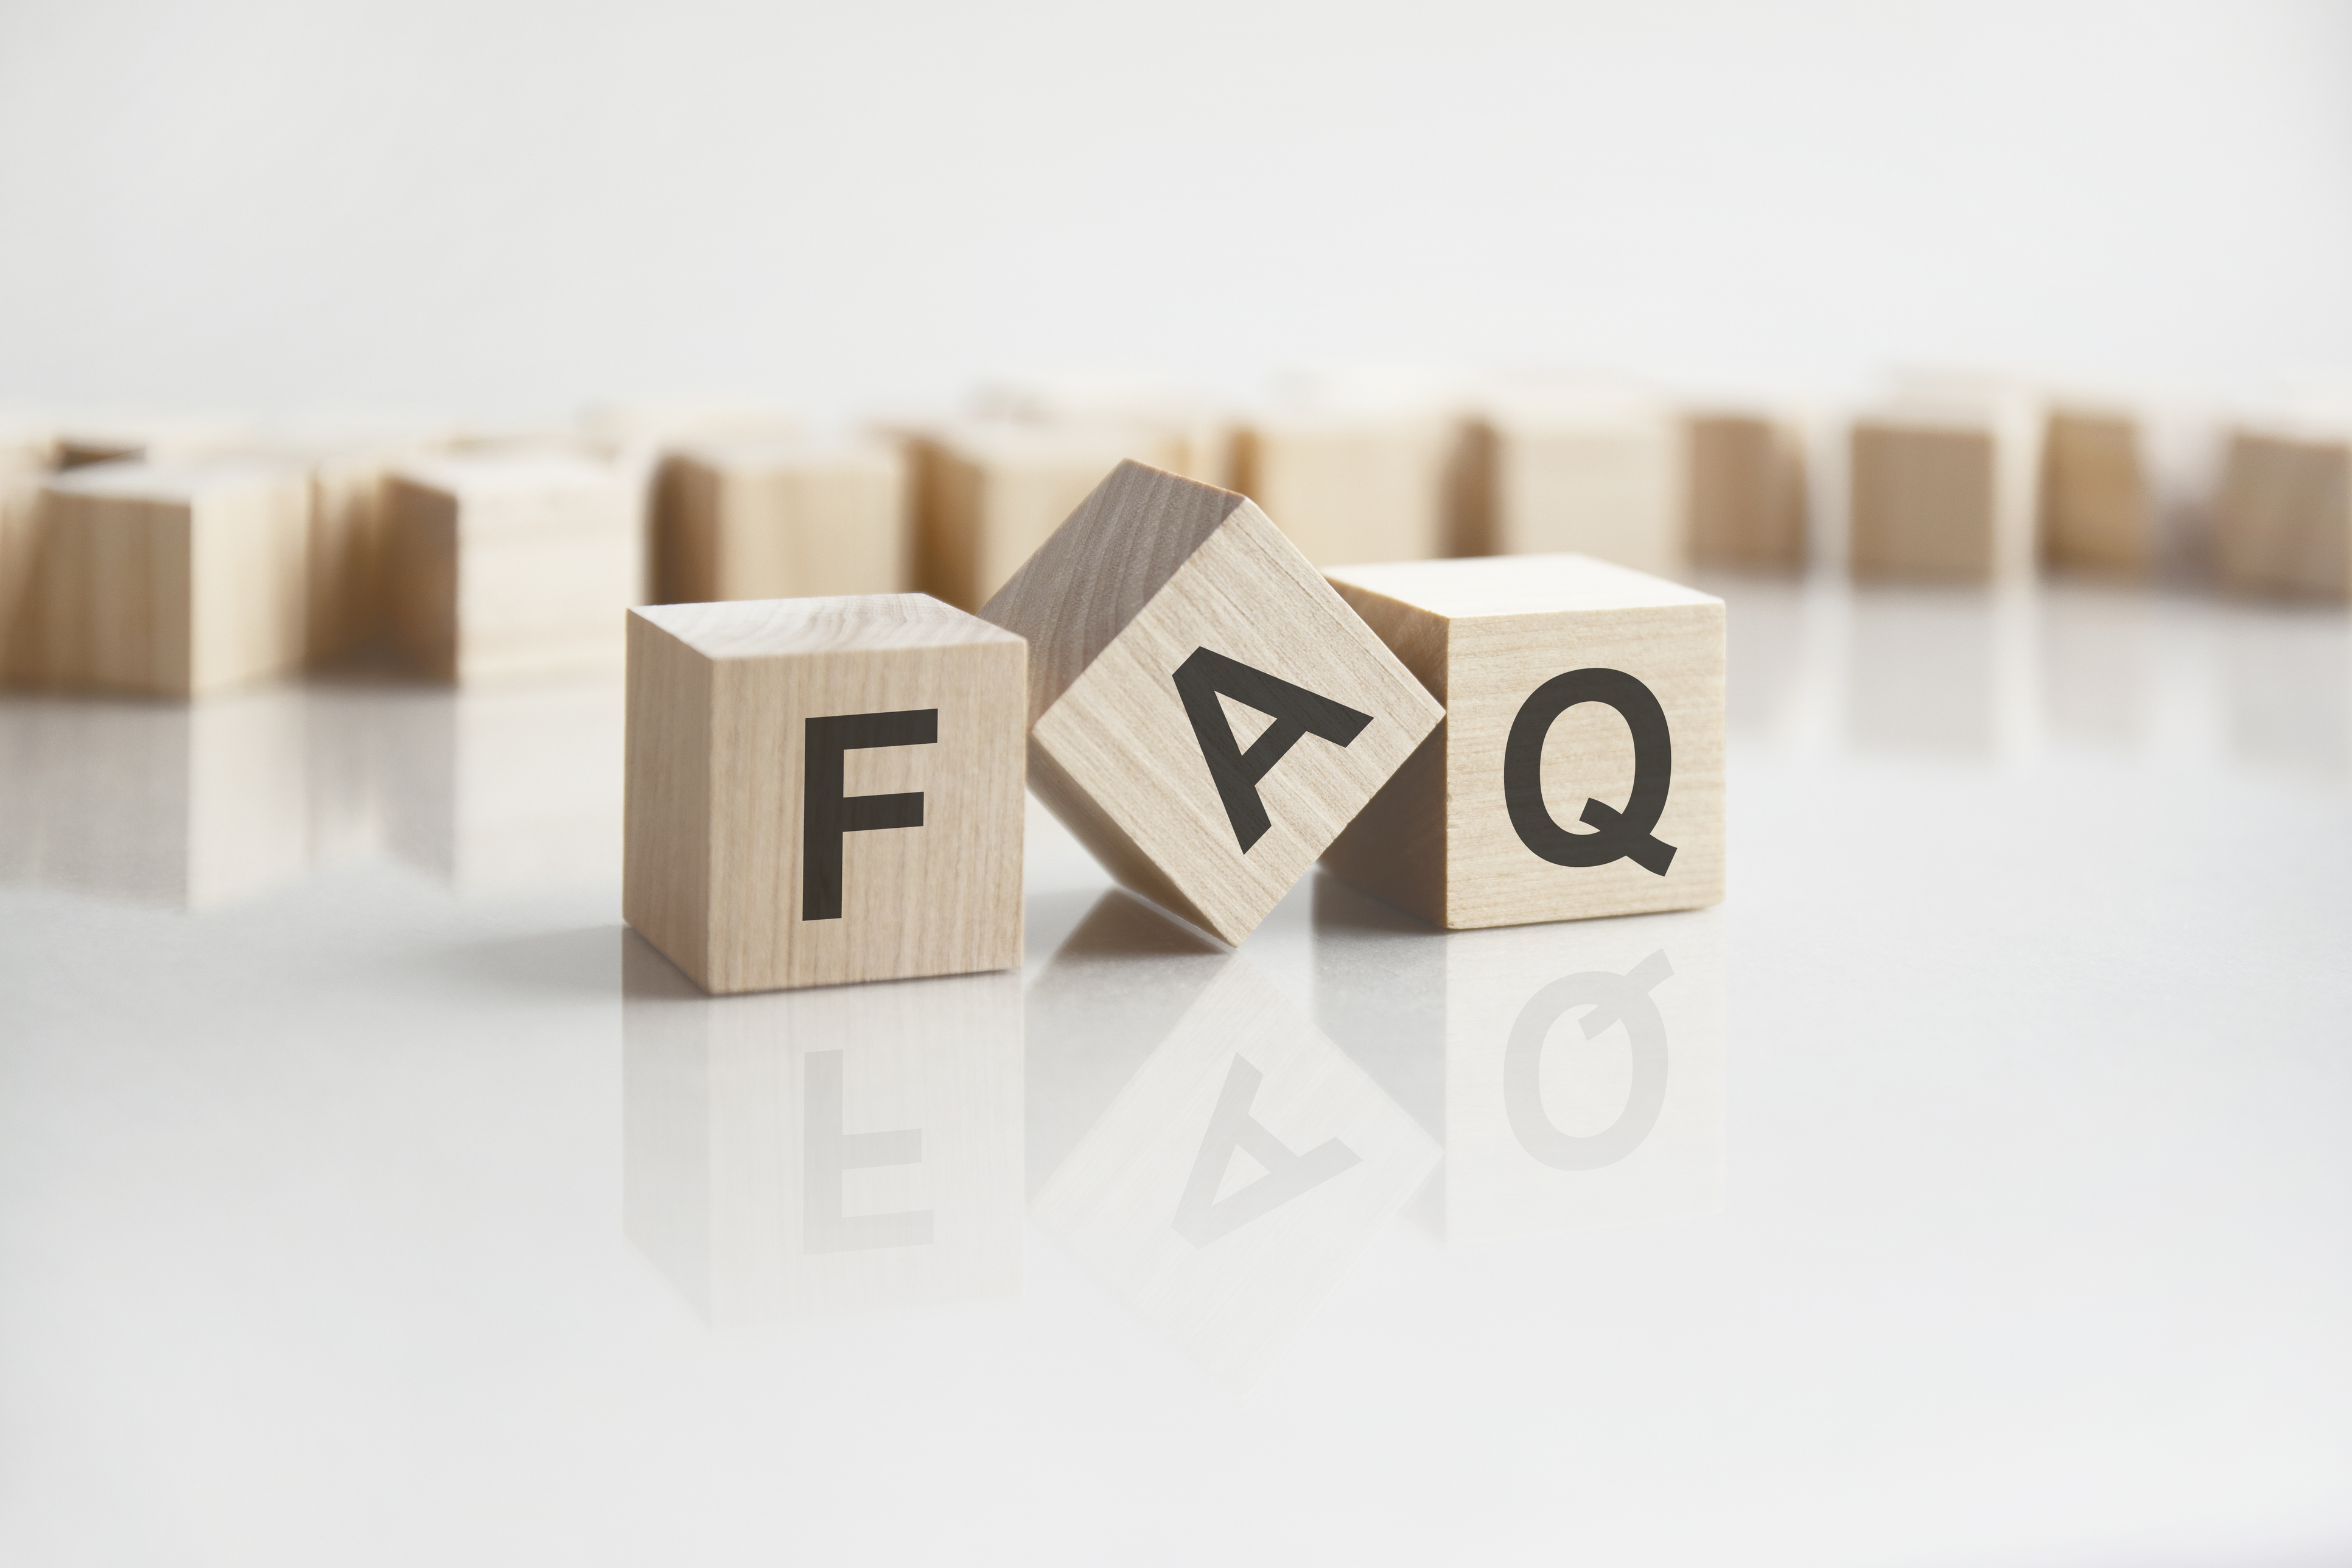 Letters FAQ on woodden cubes